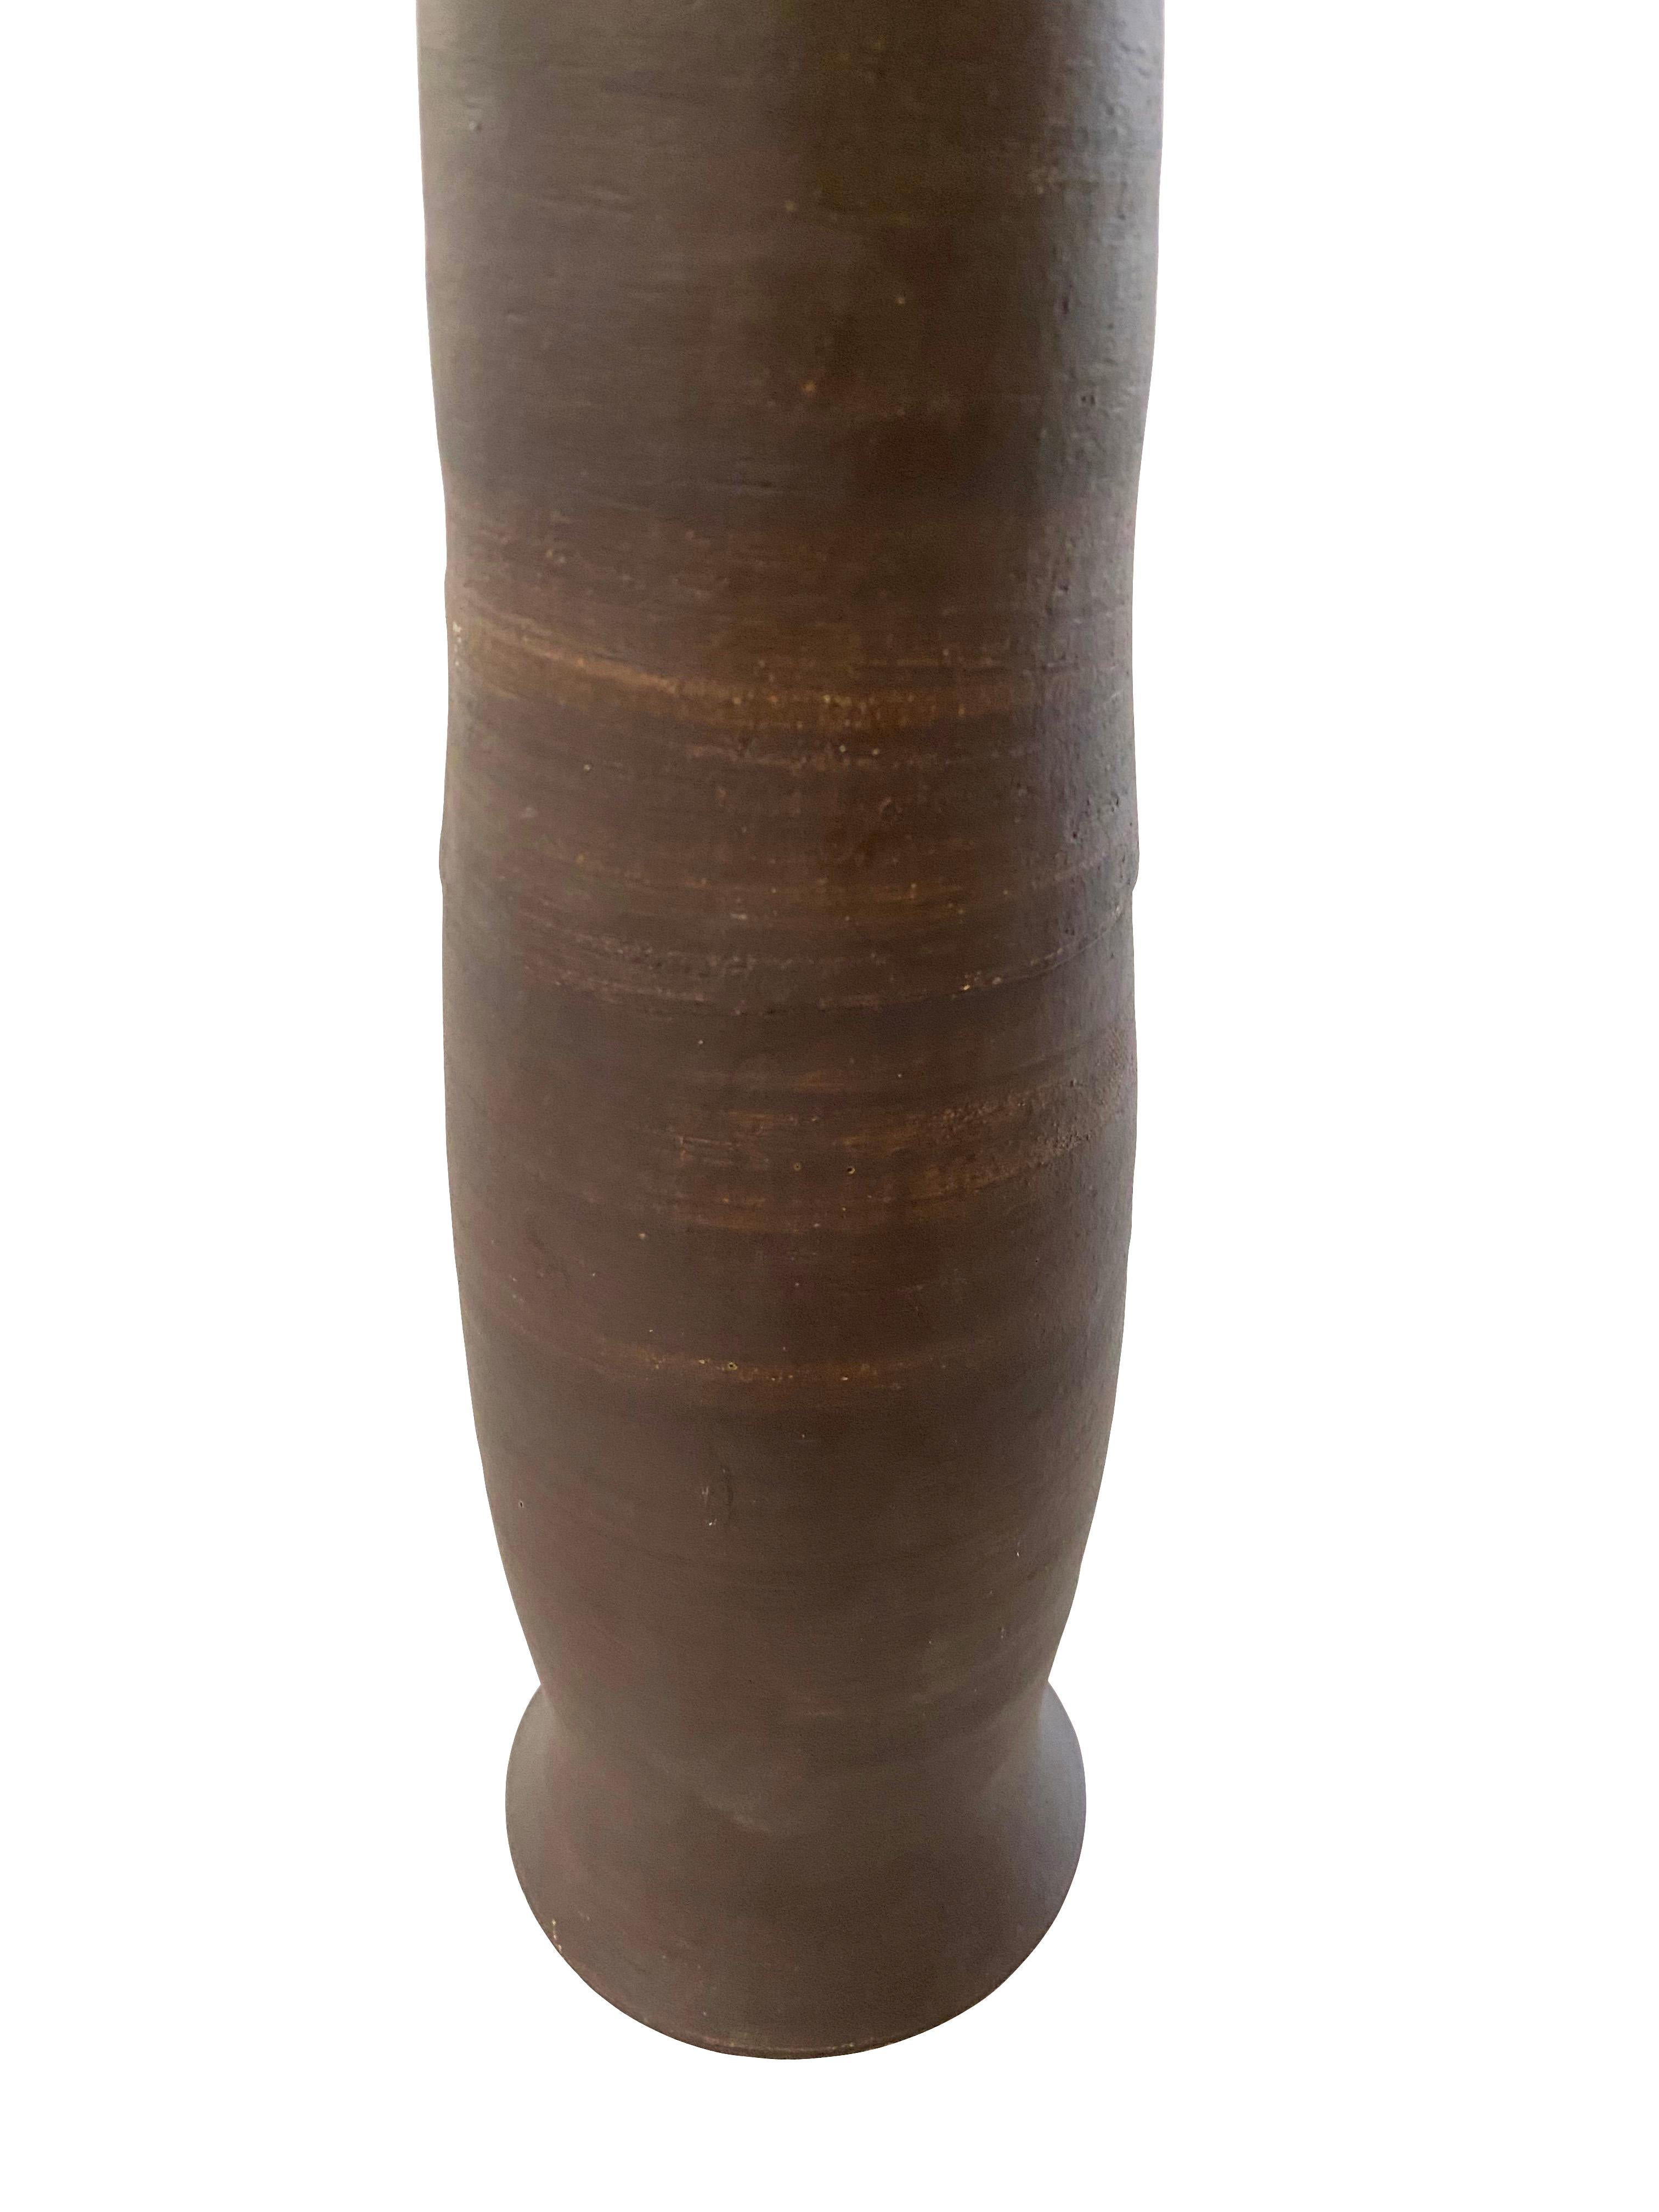 Tall thin chocolate brown textured stoneware vase.
Matte finish
Can hold water
Veteran photographer Sandi Fellman's ceramic vessels are an exploration of a new medium. The forms, palettes, and sensuality of her photos can be found within each